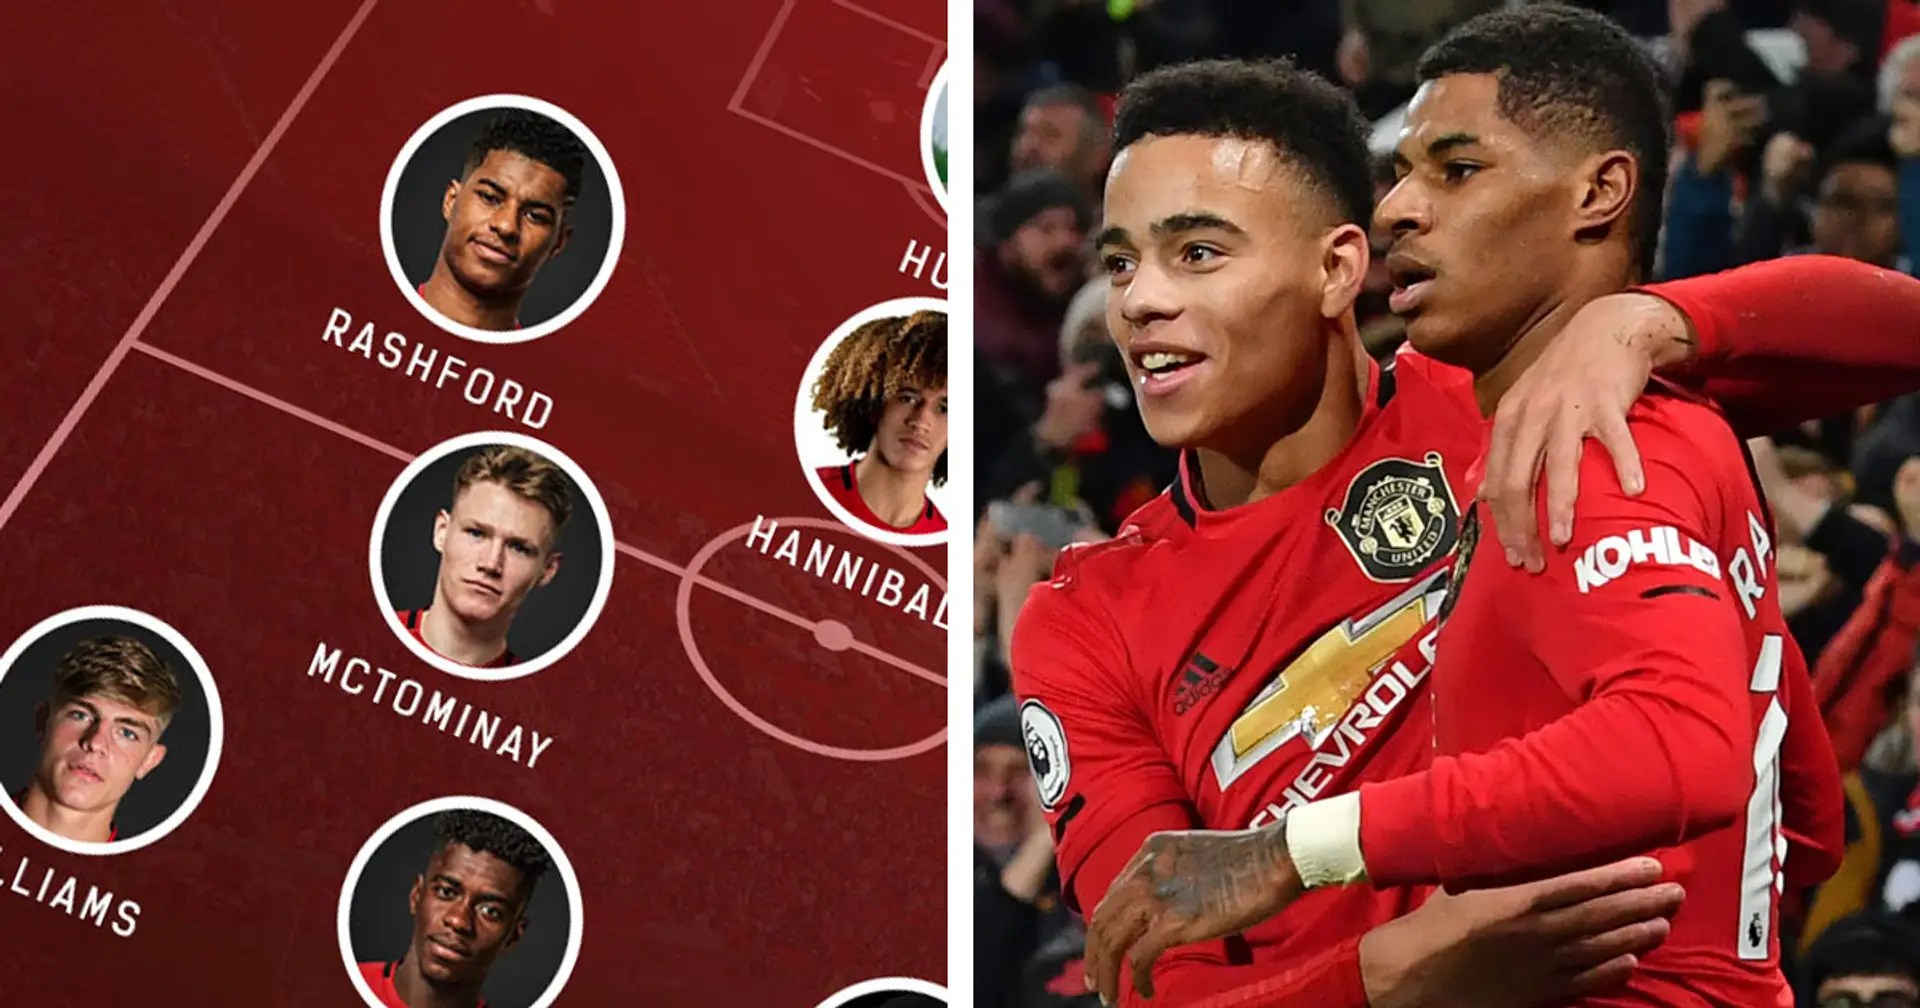 Hannibal, Pogba & 9 more: Man United could field entire XI of academy players alone